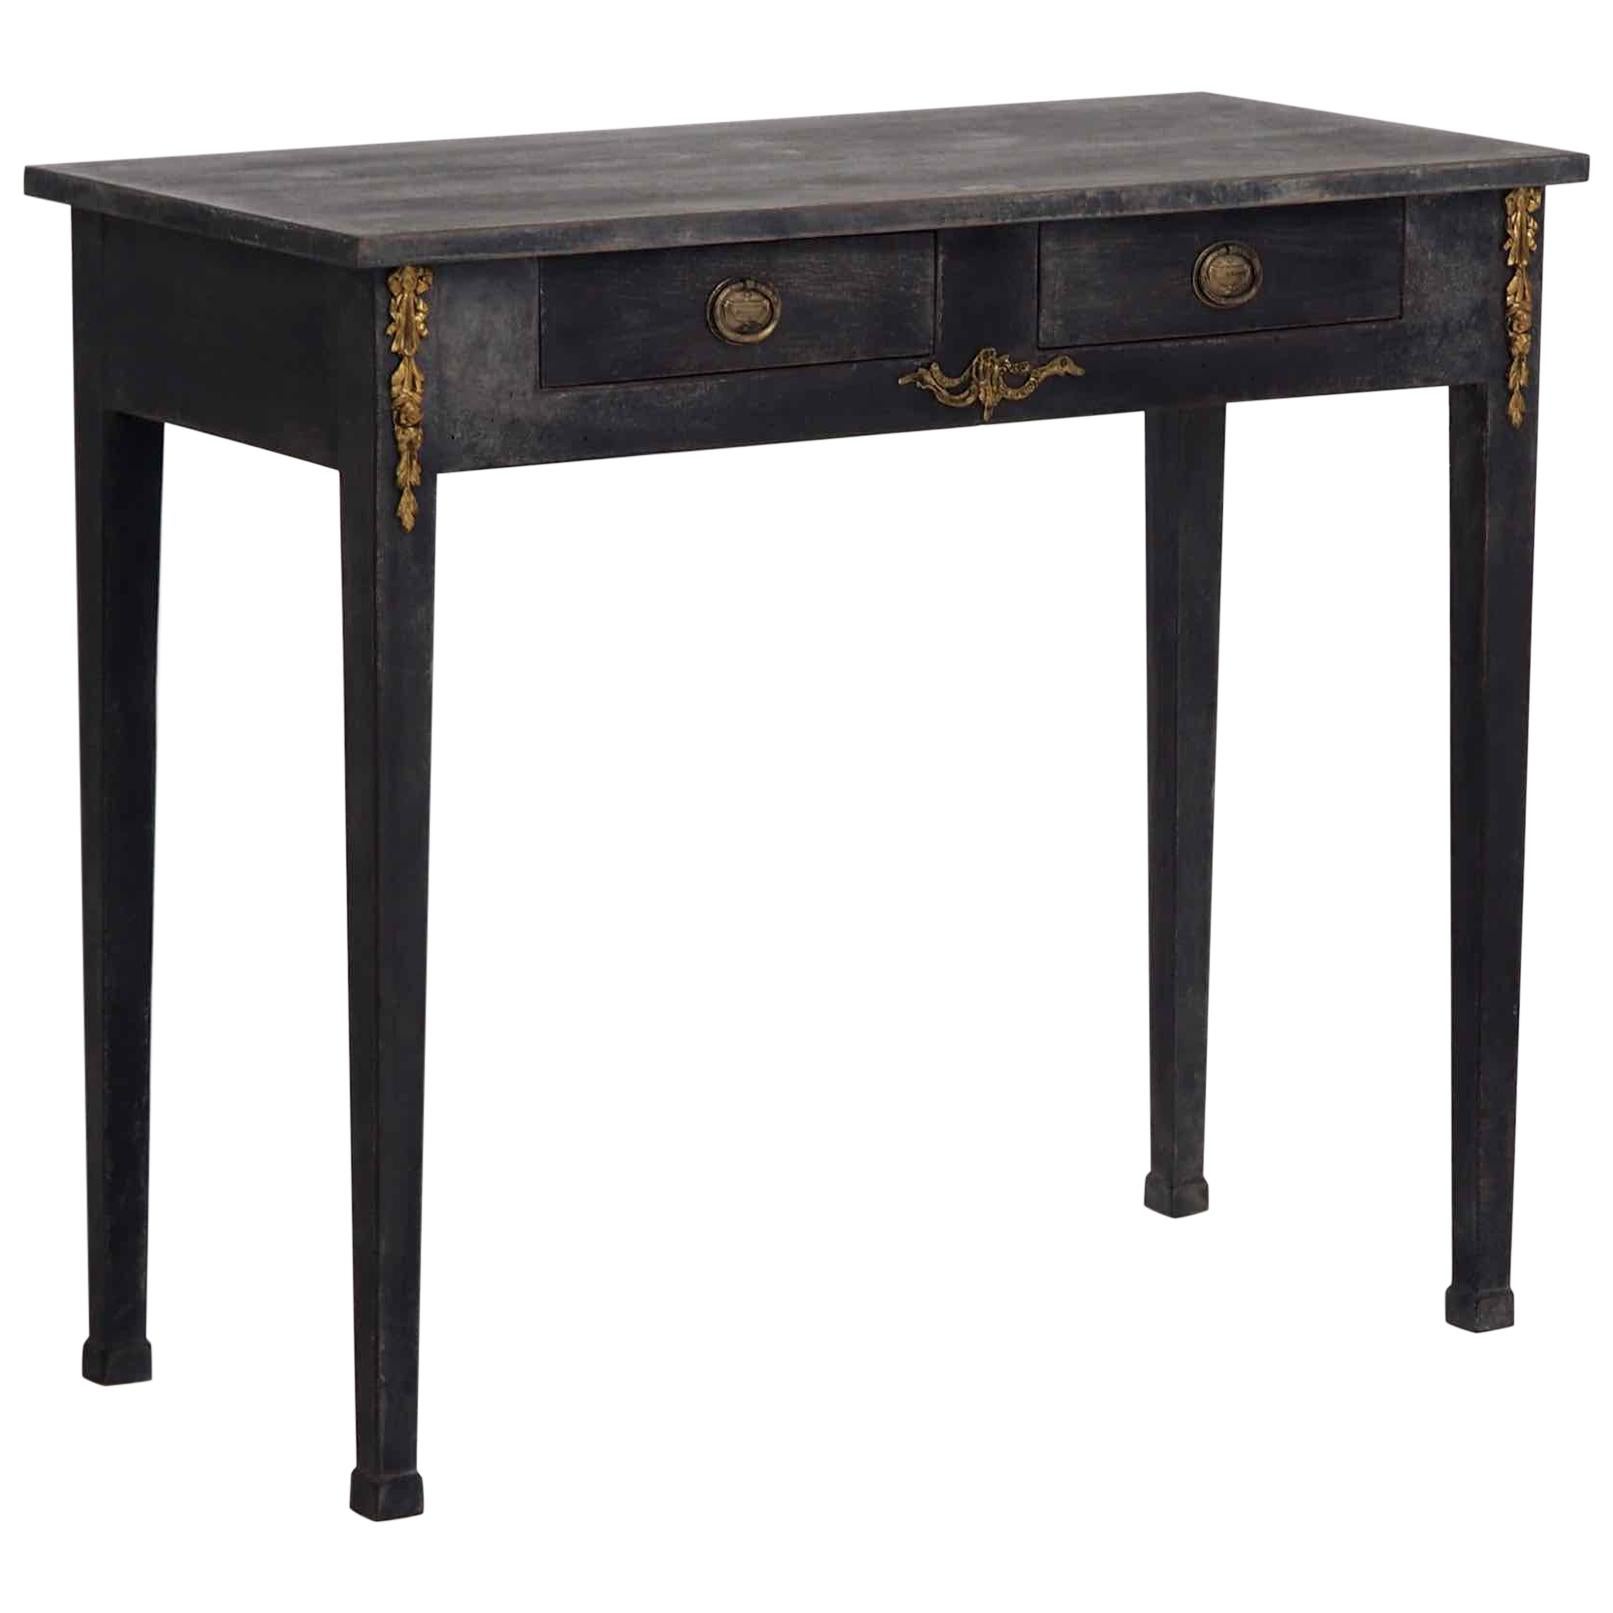 Charming Bronze Mounted Console Table with Two Drawers, 100 Years Old